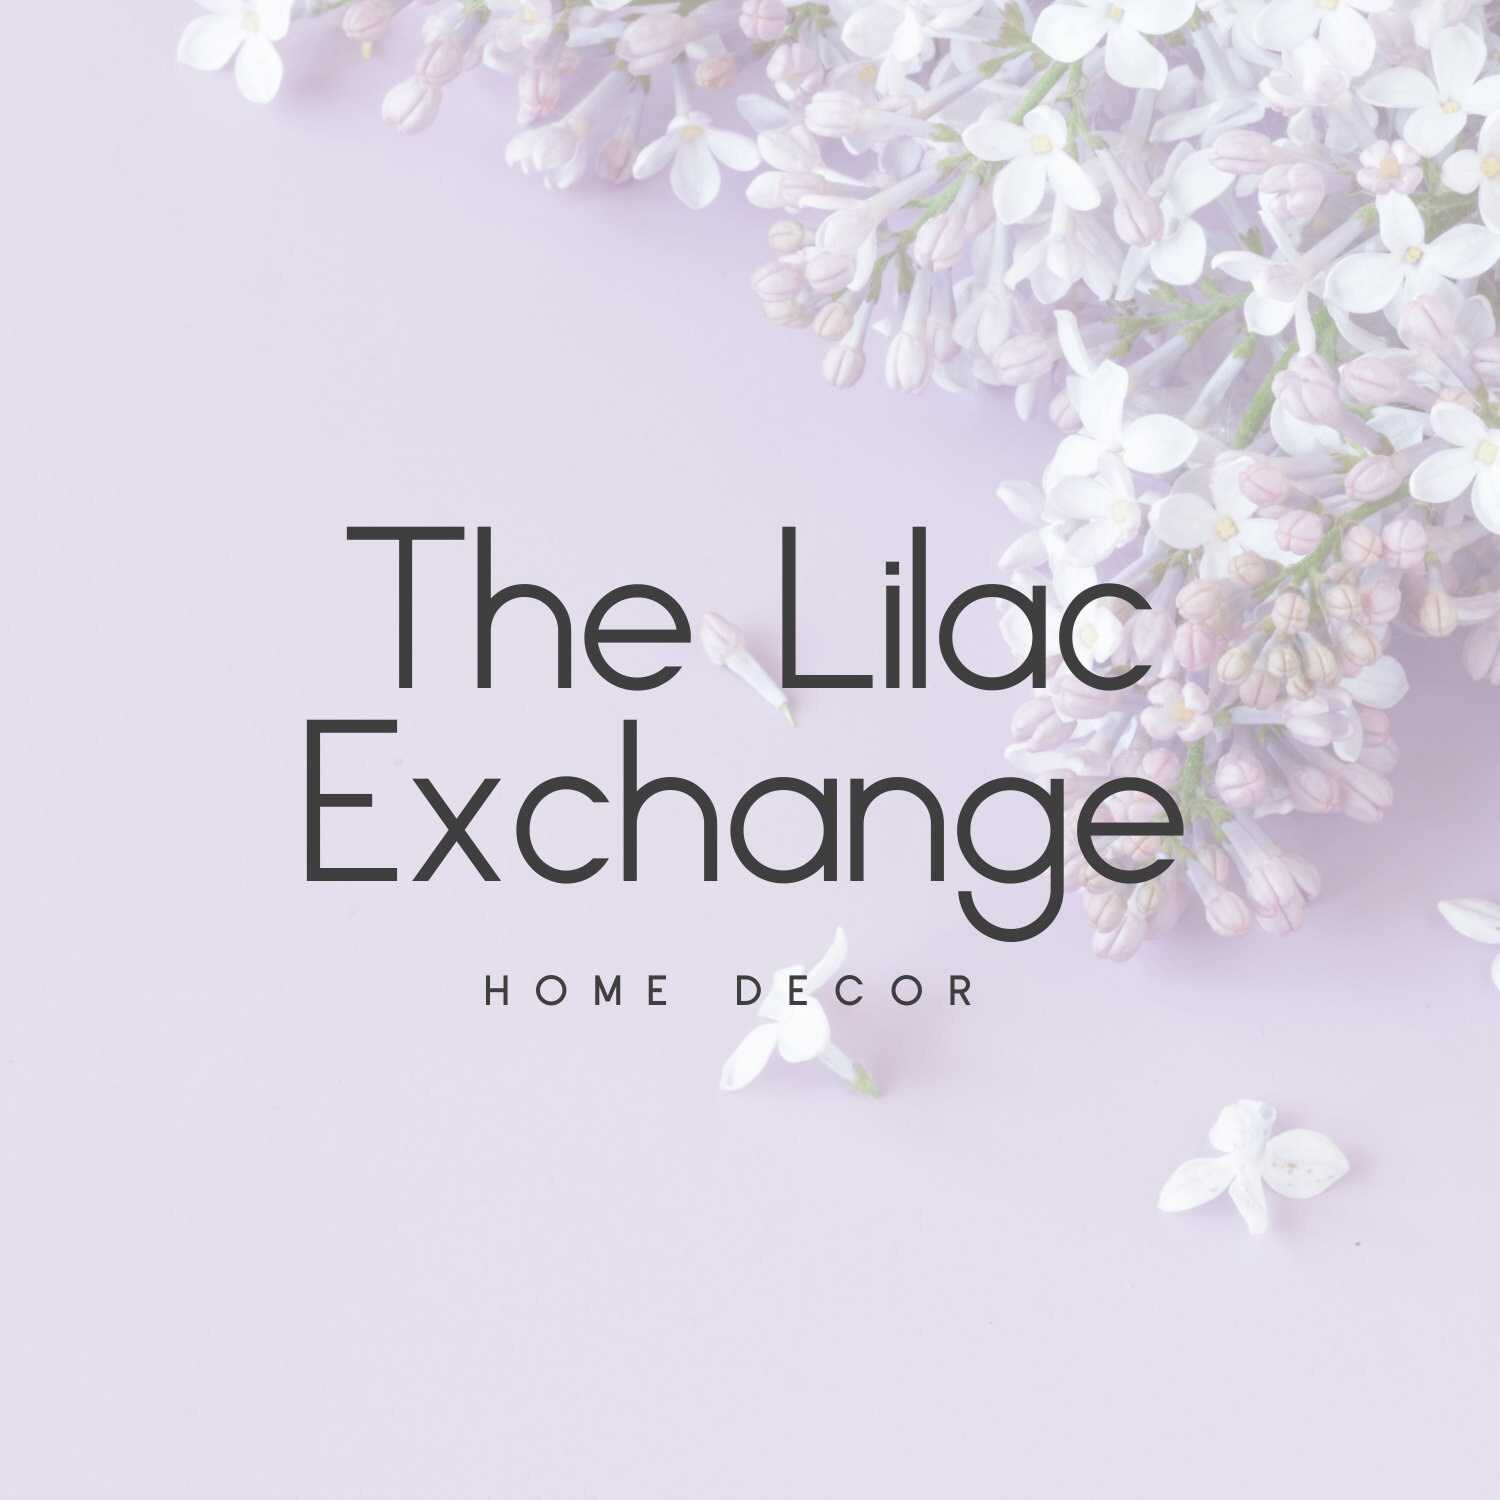 TheLilacExchange